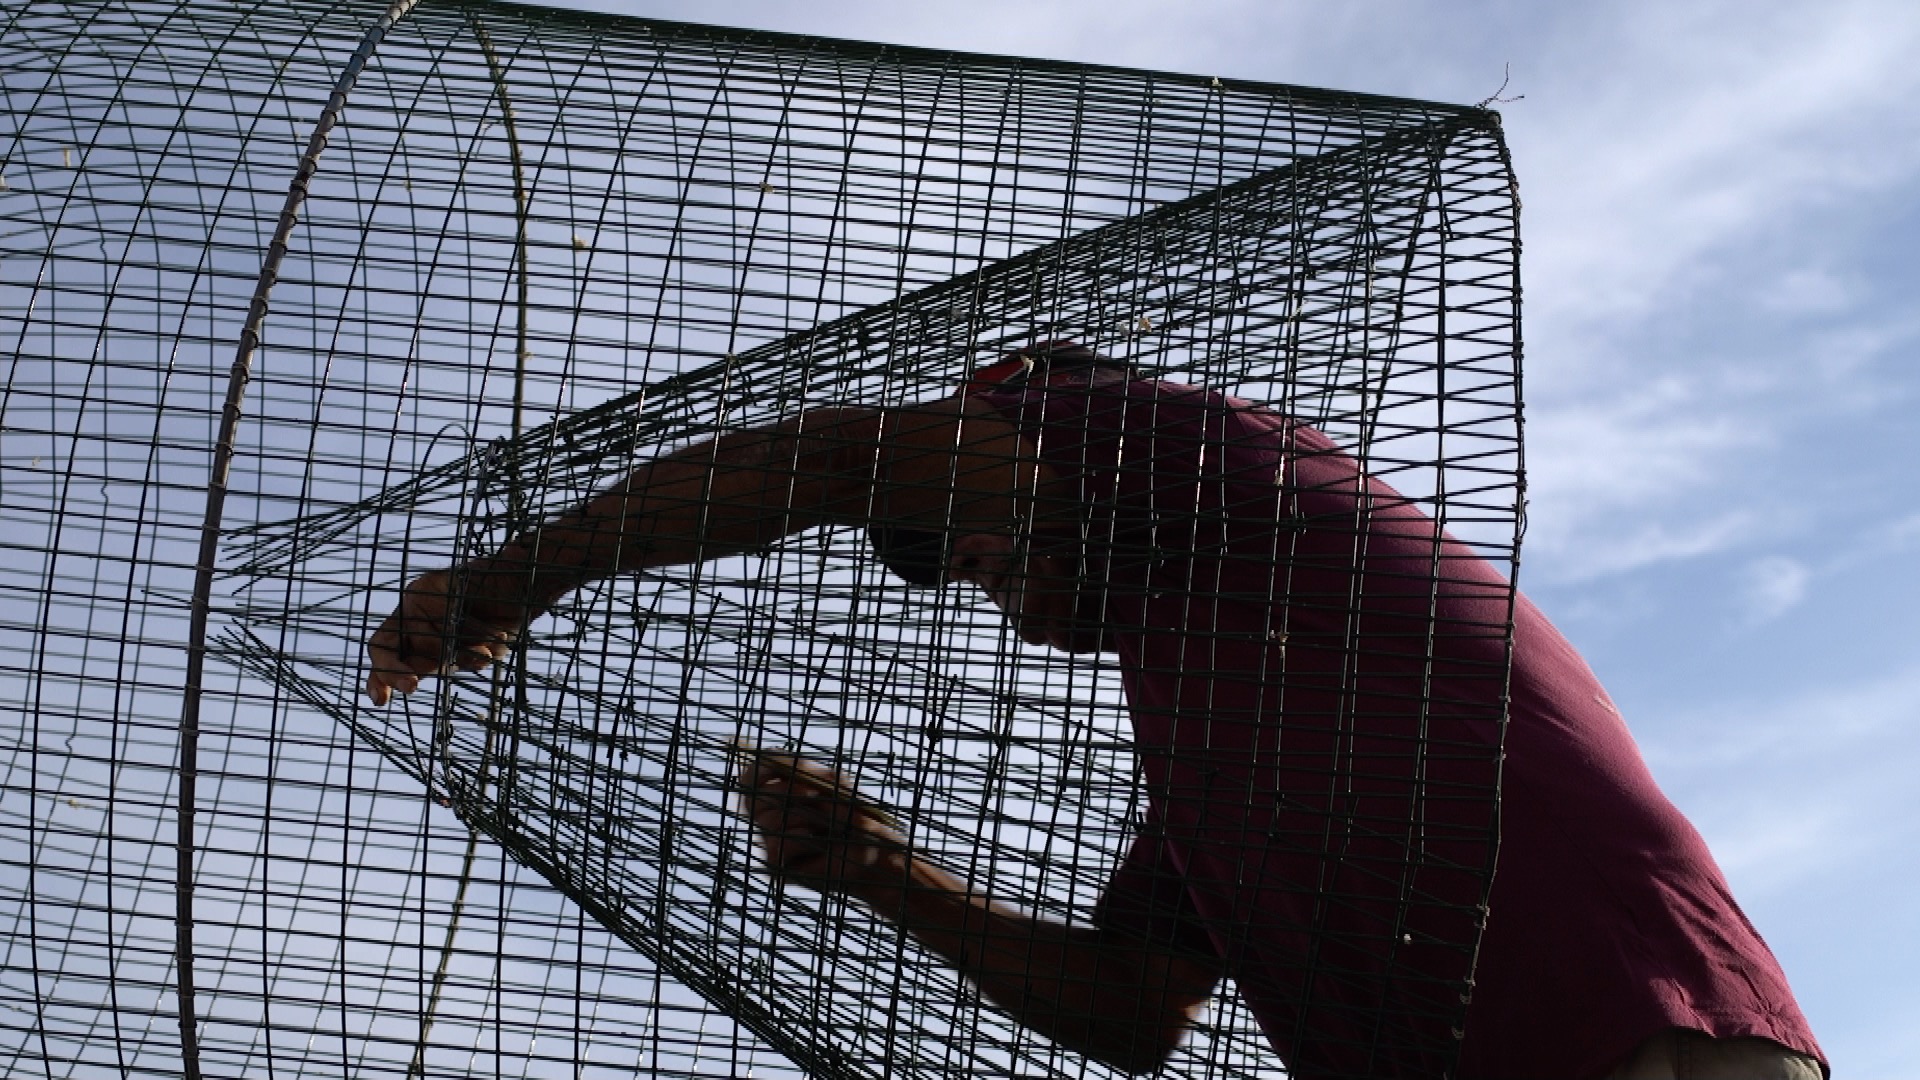 Man leaning into net, promotional image for A Visibility Matrix by Sven Anderson & Gerard Byrne, at Void Gallery, 2019